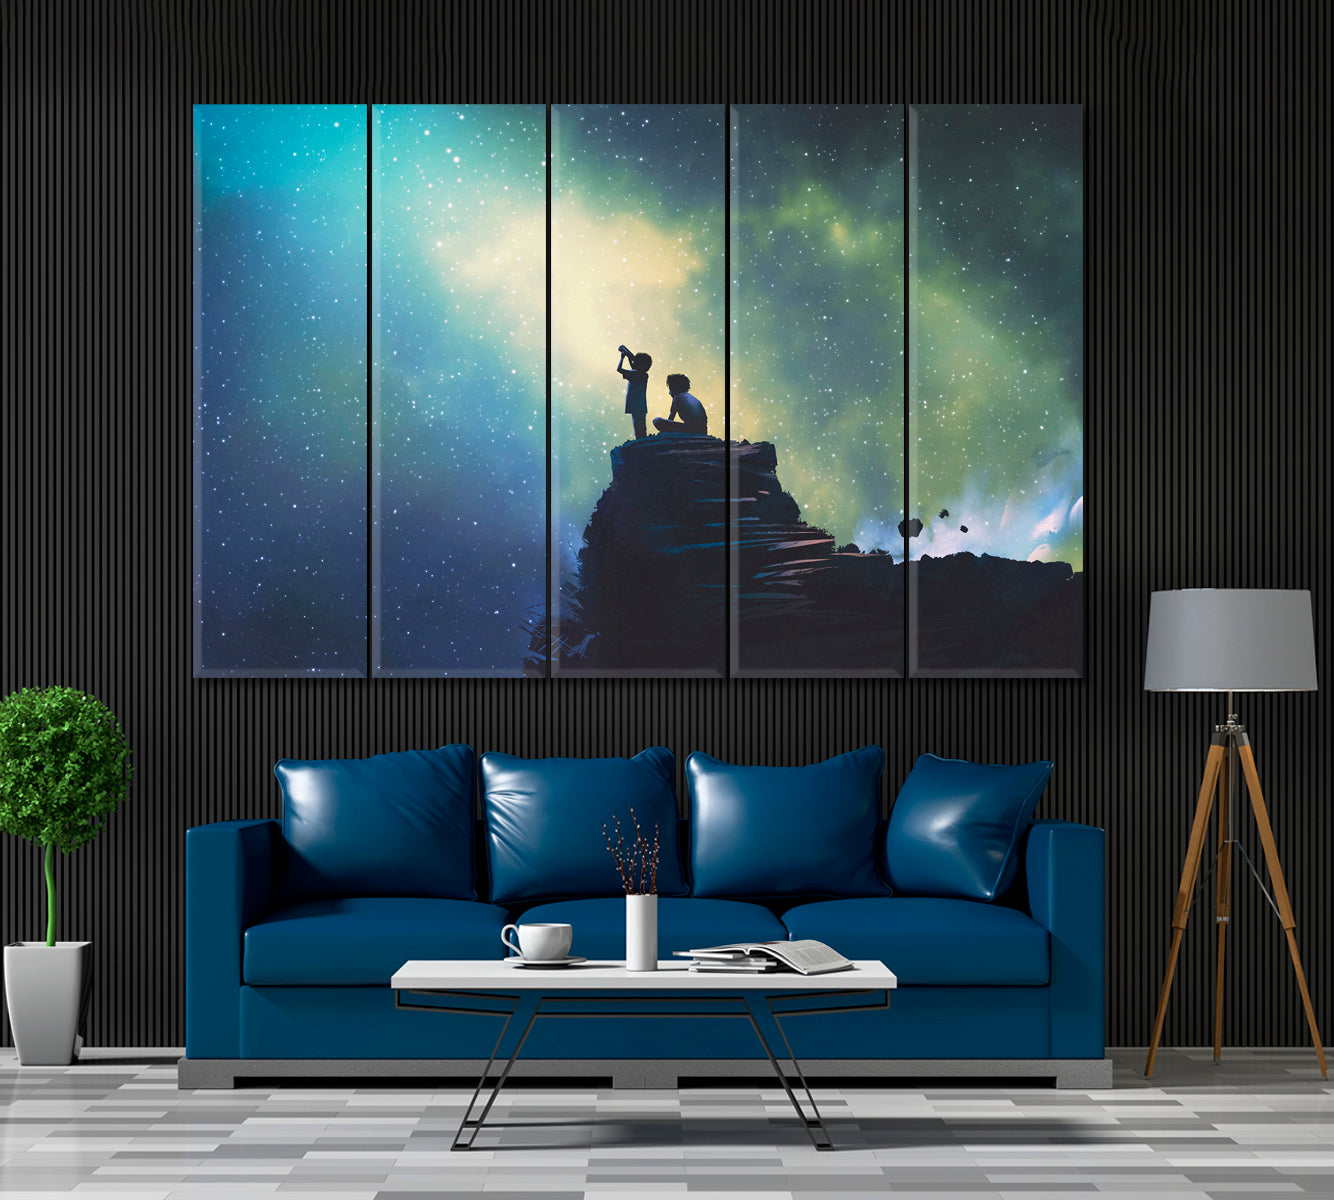 Two Brothers Looking at Stars Canvas Print ArtLexy 5 Panels 36"x24" inches 